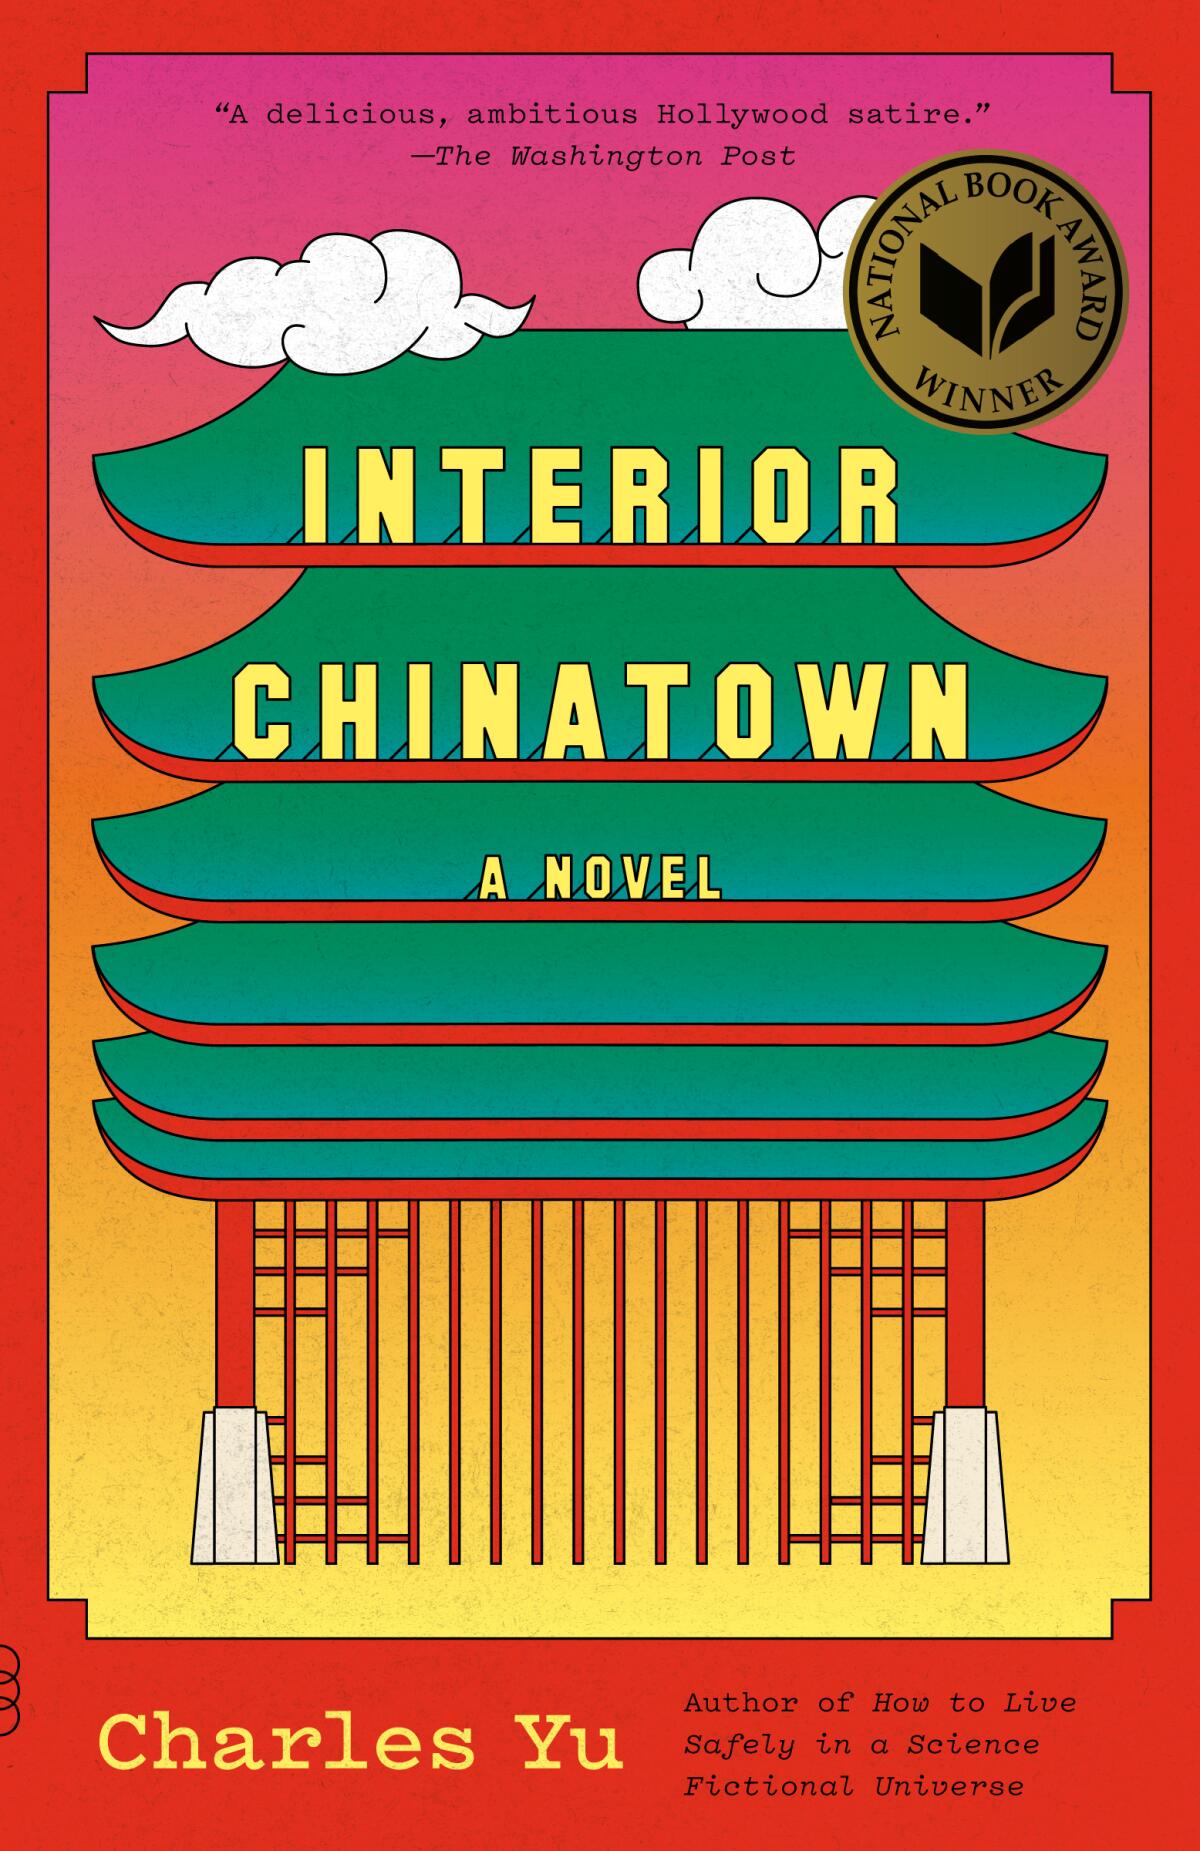 A book jacket for Charles Yu's "Interior Chinatown." Credit:Vintage